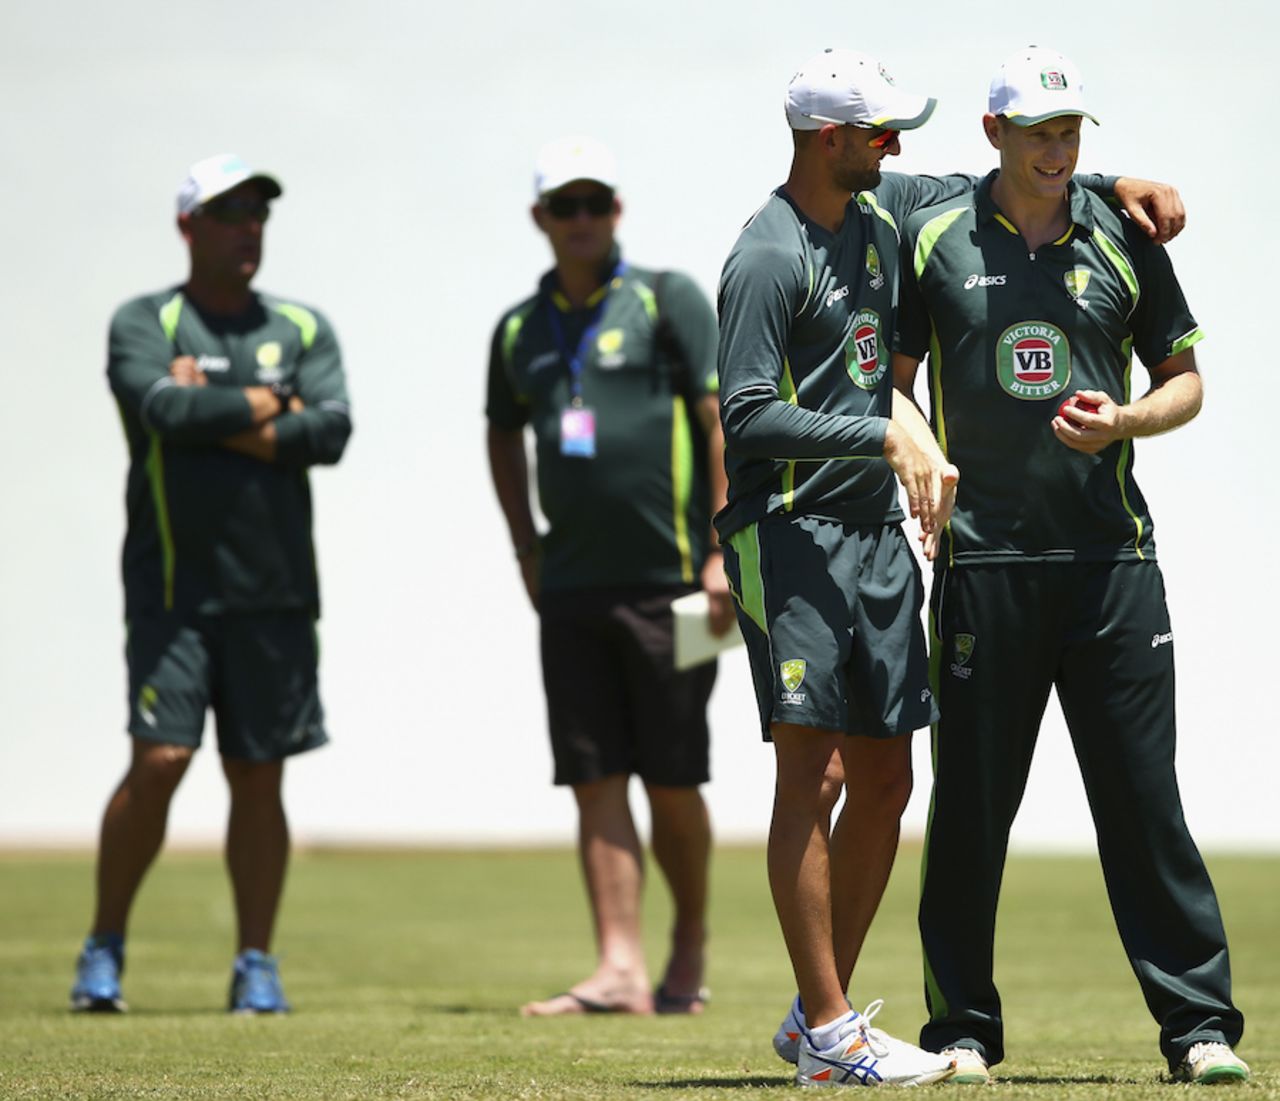 Nathan Lyon congratulates Adam Voges after being informed of his selection in the XI, Roseau, June 2, 2015